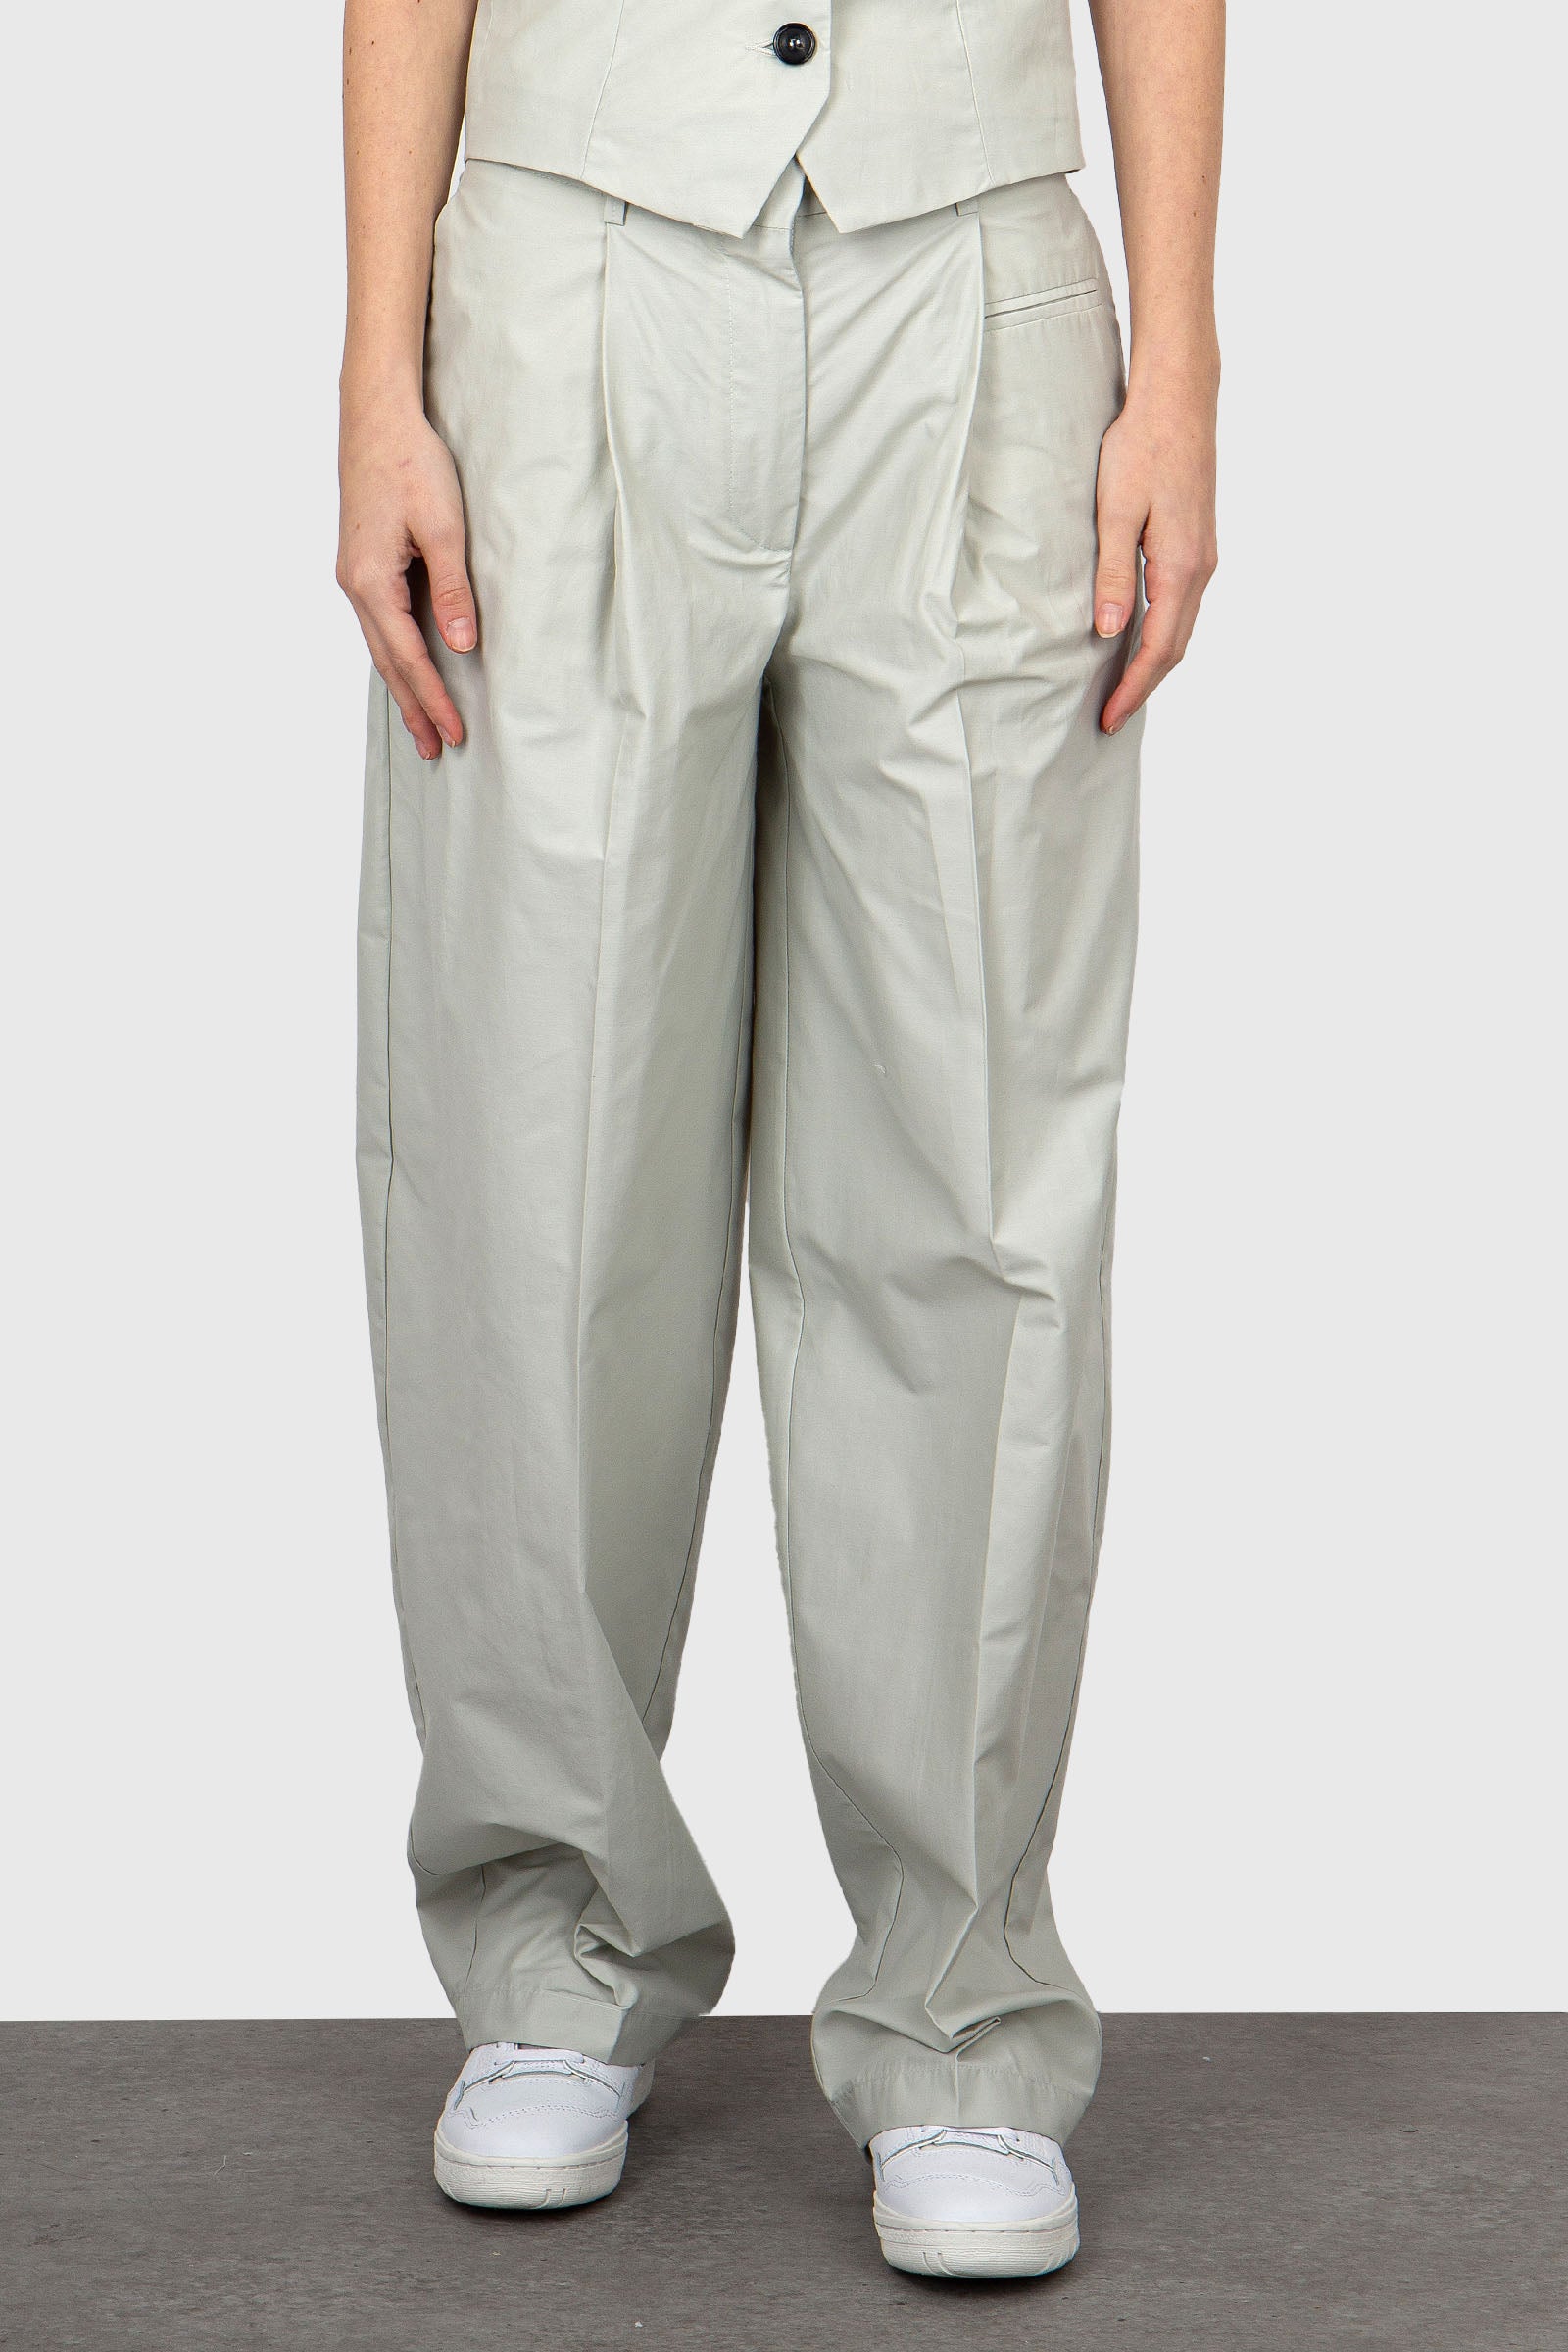 Grifoni Banana Trousers in Ice Cotton - 3